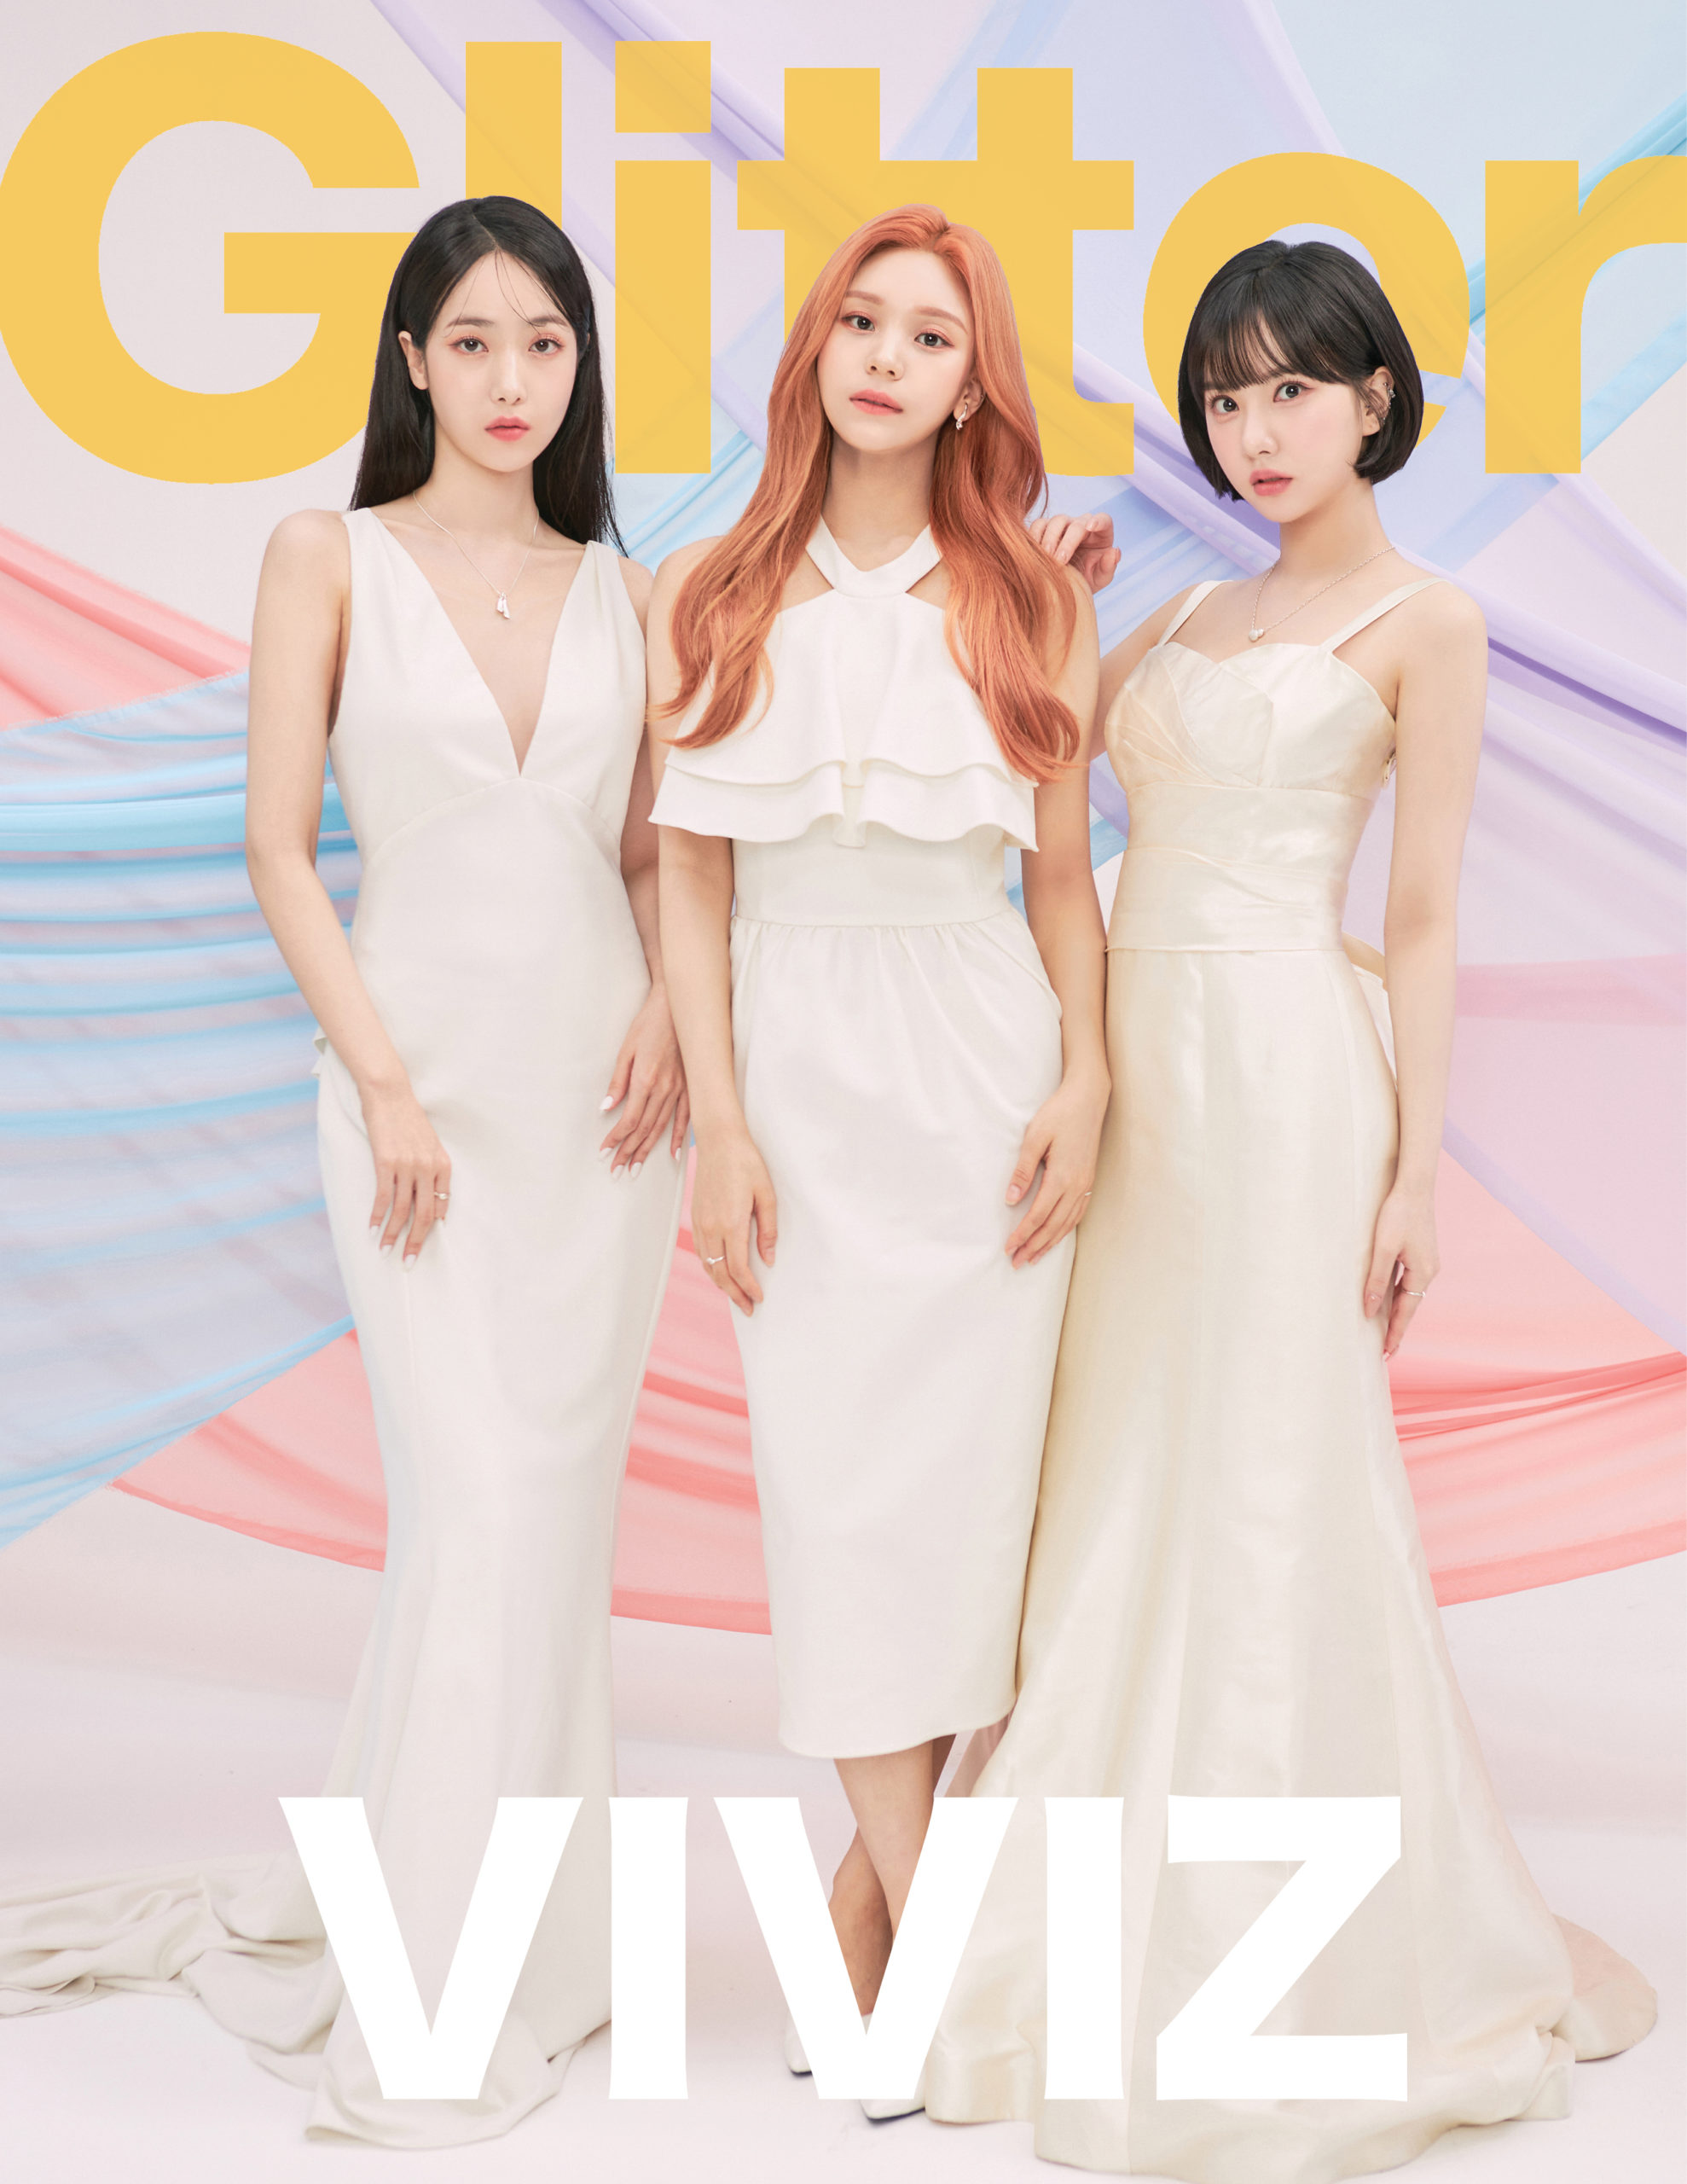 VIVIZ, the three-member group consisting of SinB, Eunha, and Umji, brought their stellar track “BOP BOP!” into the world early this year with their debut mini-album Beam of Prism. The girls descended into a fantastical and bright universe that immediately shook the K-pop industry. Their performance expertise landed them on the Mnet survival show Queendom 2, and on July 6, released their first comeback Summer Vibe.  